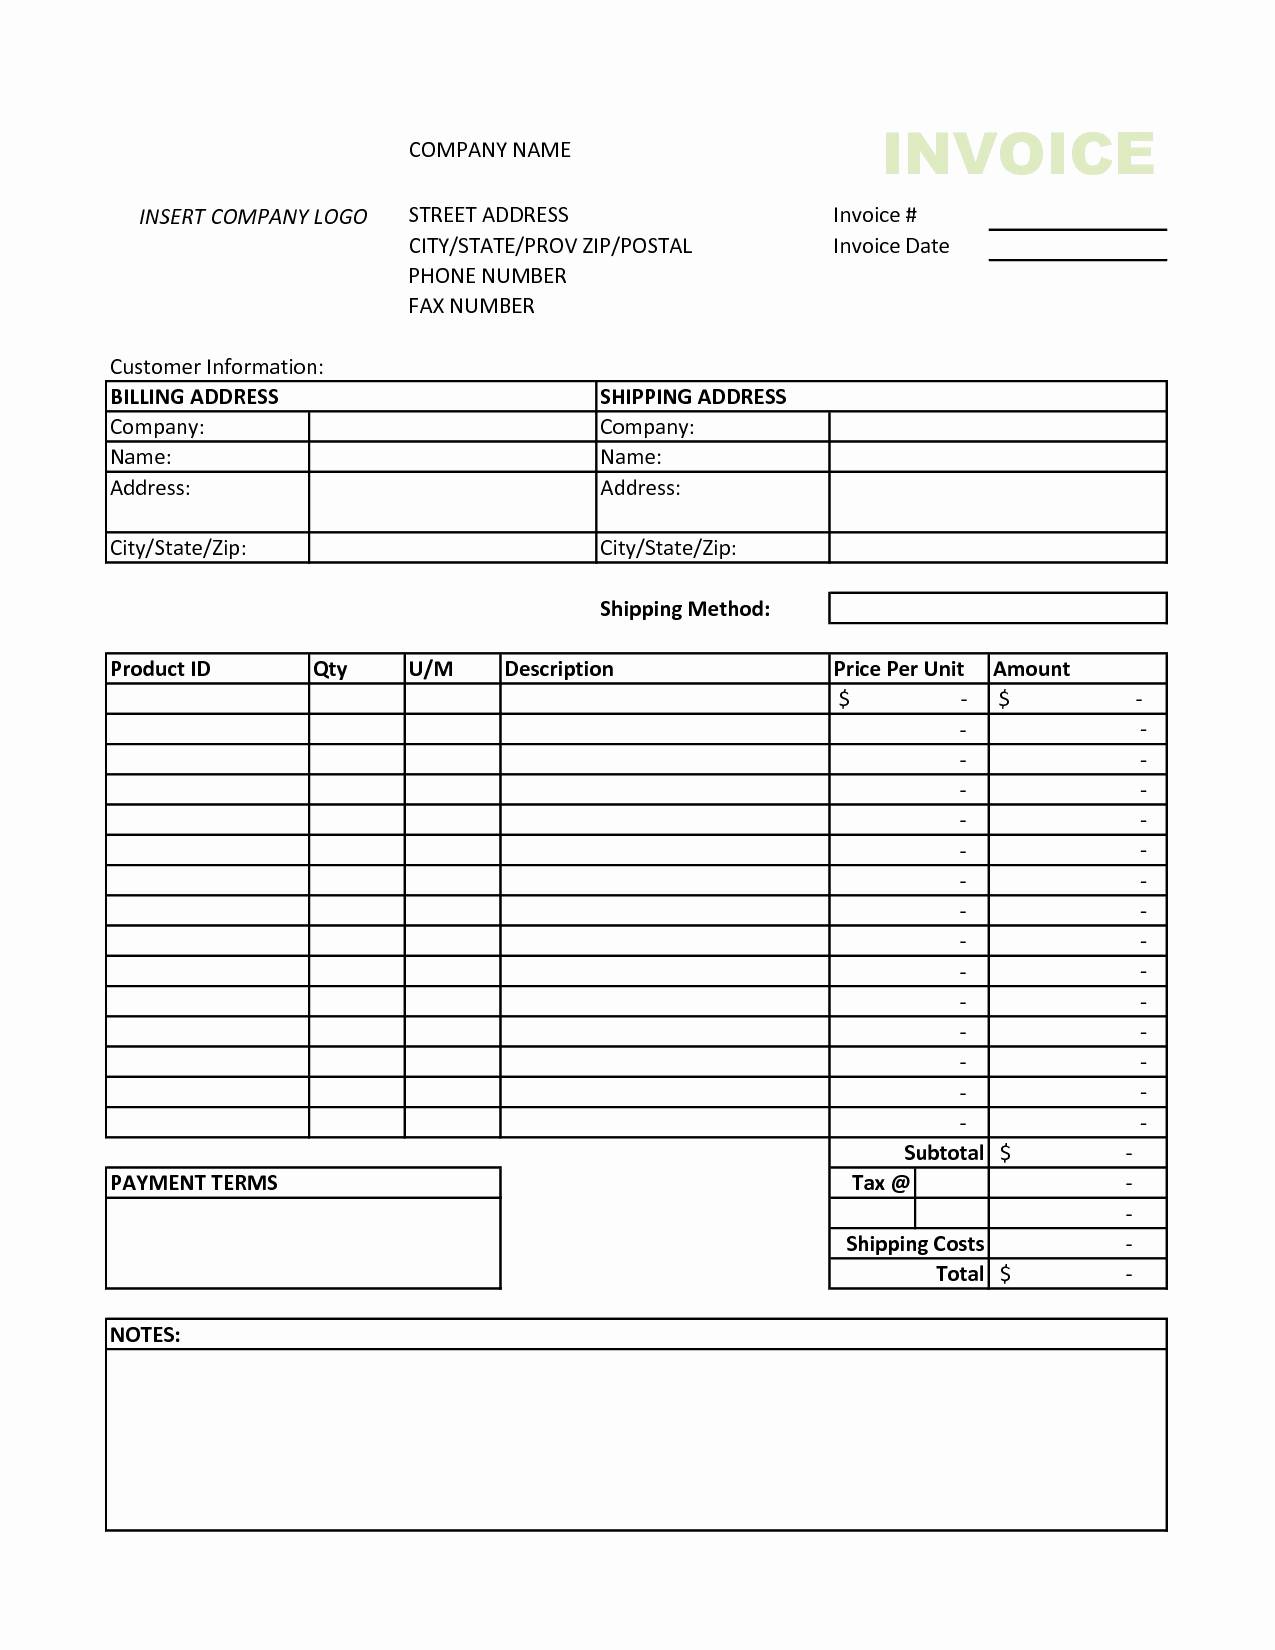 invoice template excel 2010 2 2390